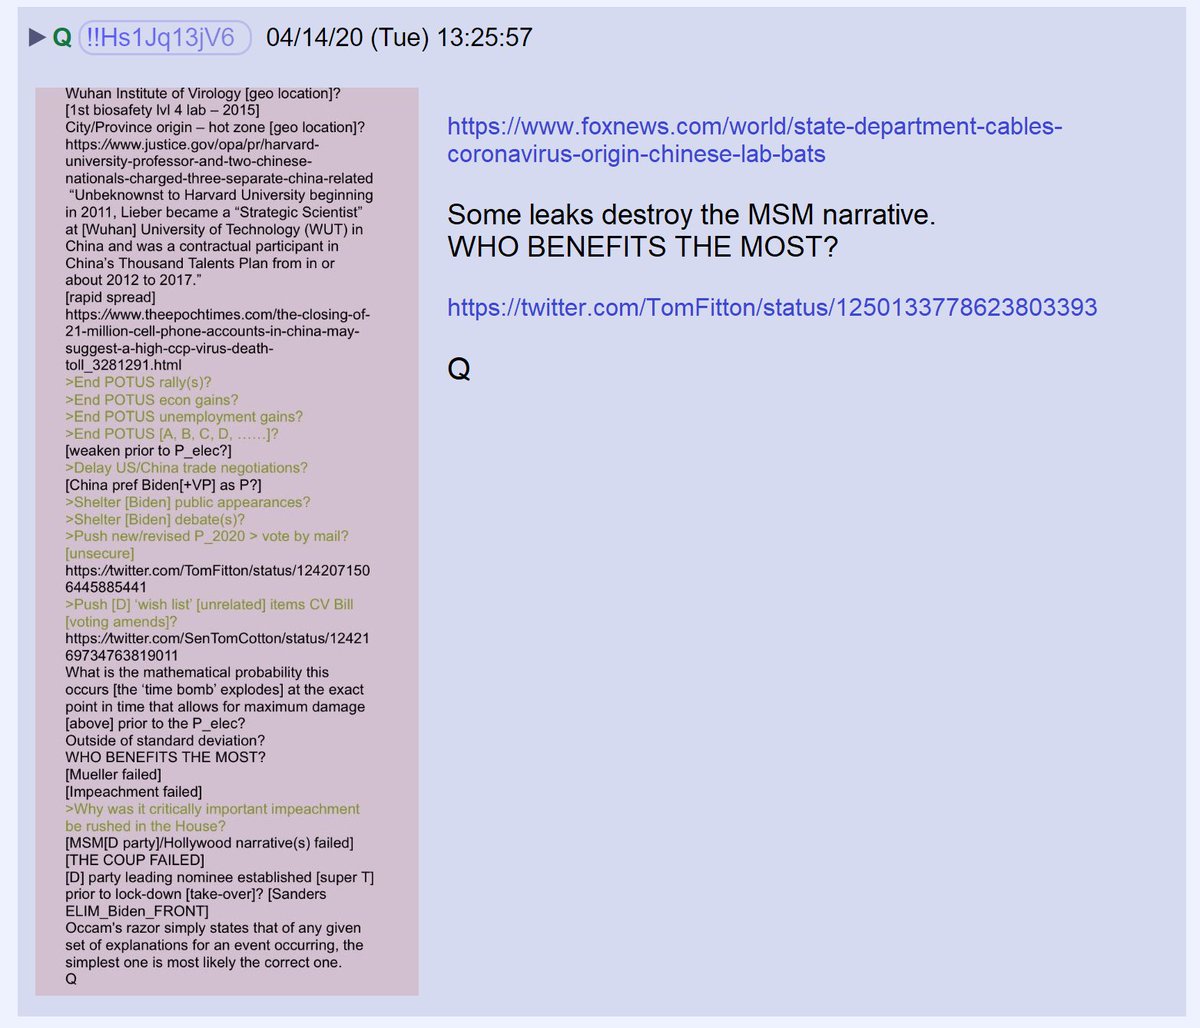 62) Q posted a link to the above article and a link to a tweet by Tom Fitton.The screencap is a post where Q questioned the timing of events surrounding the impeachment of POTUS, the November election, and the coronavirus pandemic.